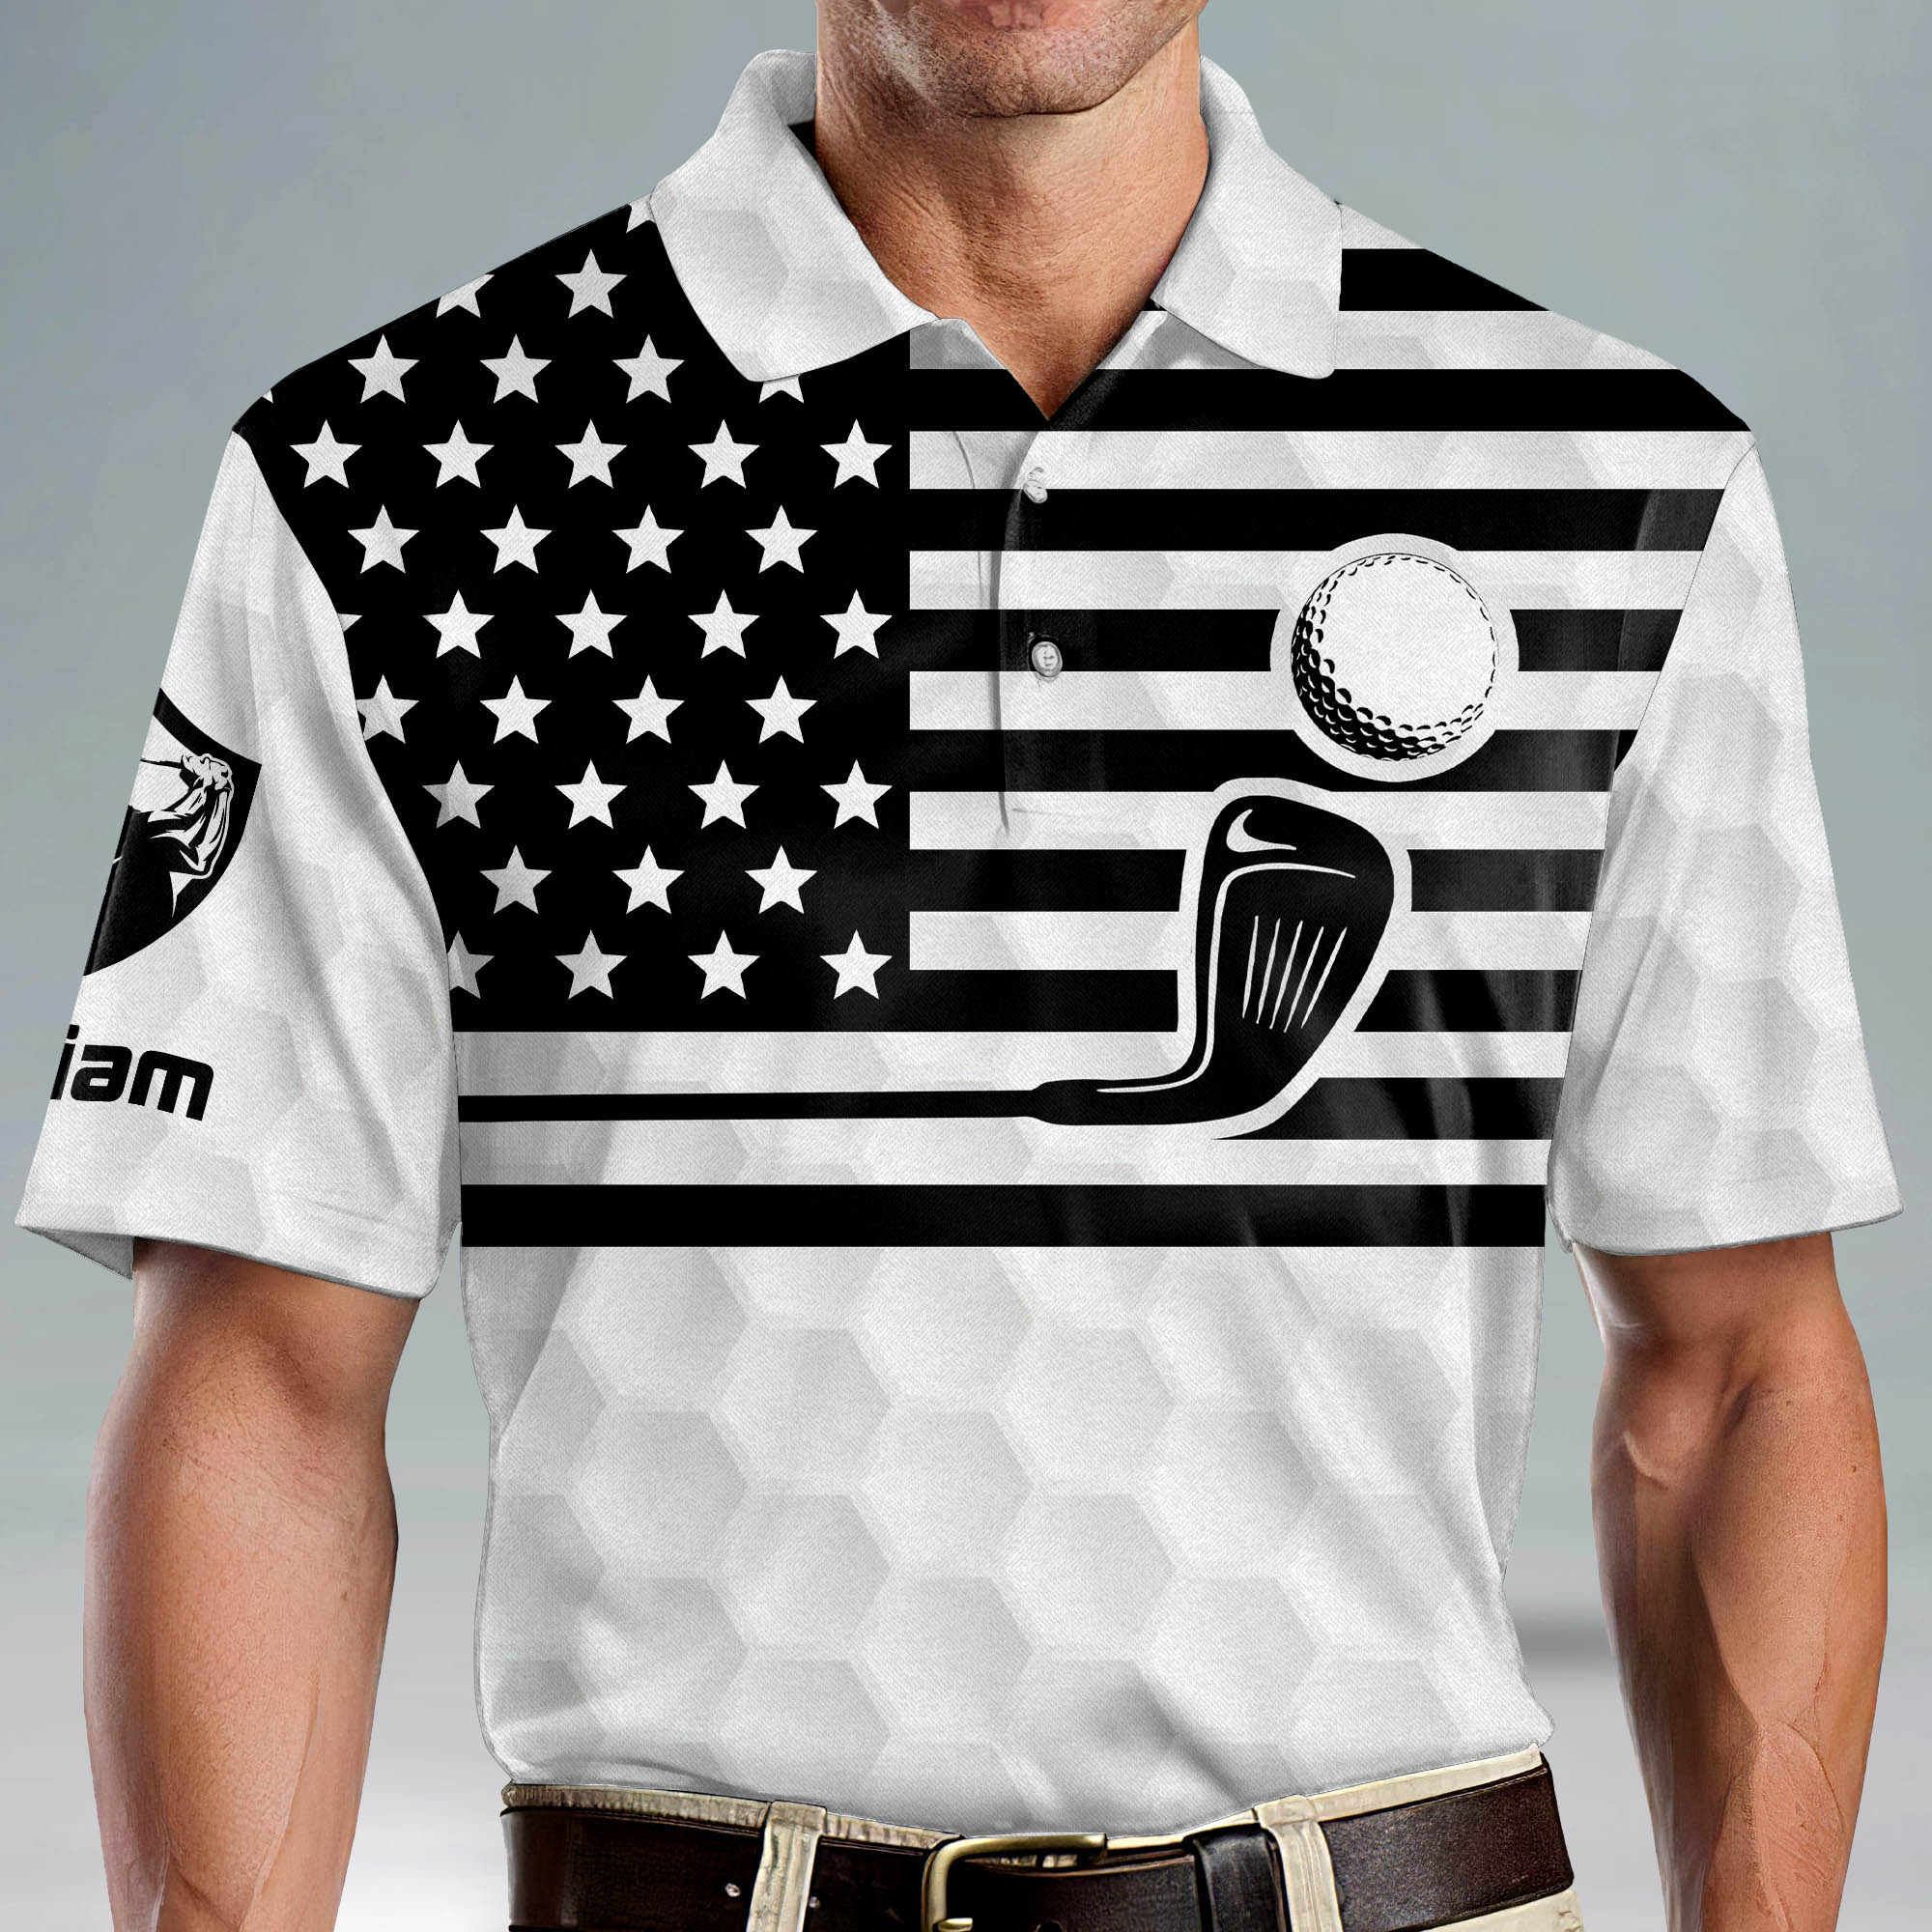 Lasfour Personalized Funny Golf Shirts Short Sleeve Polo For Men